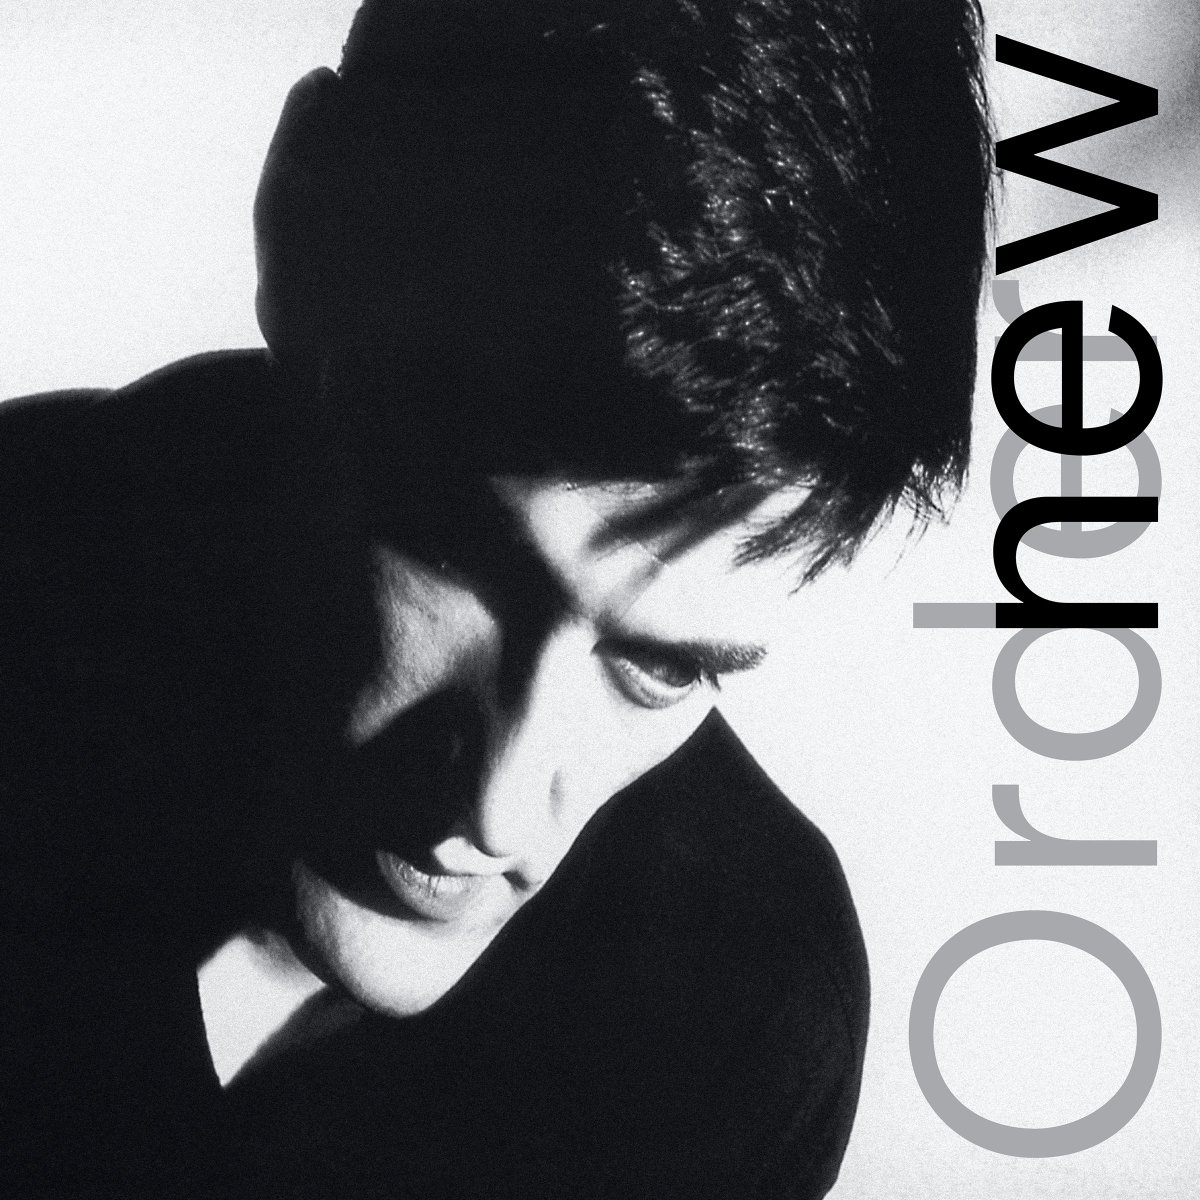 On this date in 1985, @neworder - 'Low-Life' was released.

📈 #10 for 1985, #1,019 overall

rateyourmusic.com/release/album/…